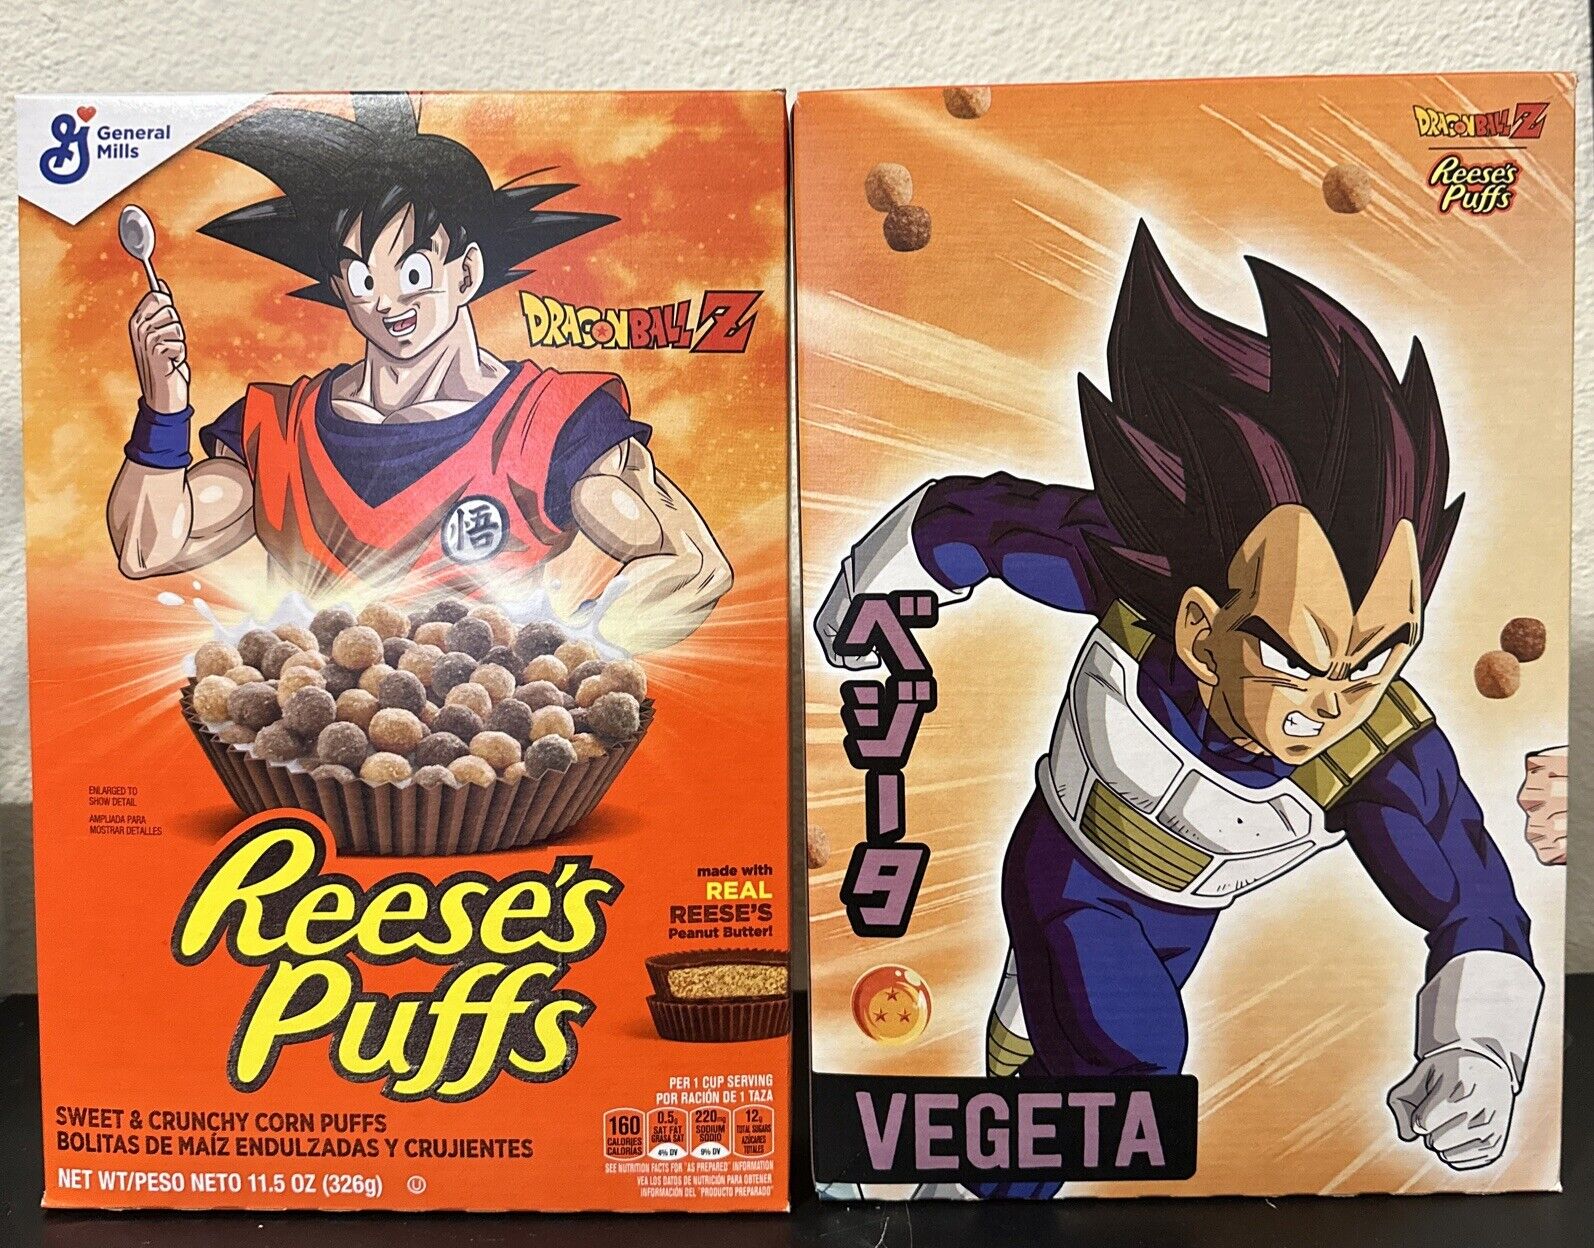 DRAGONBALL Z GOKU  x Reese’s Puffs Vegeta Box Limited Edition Cereal SEALED